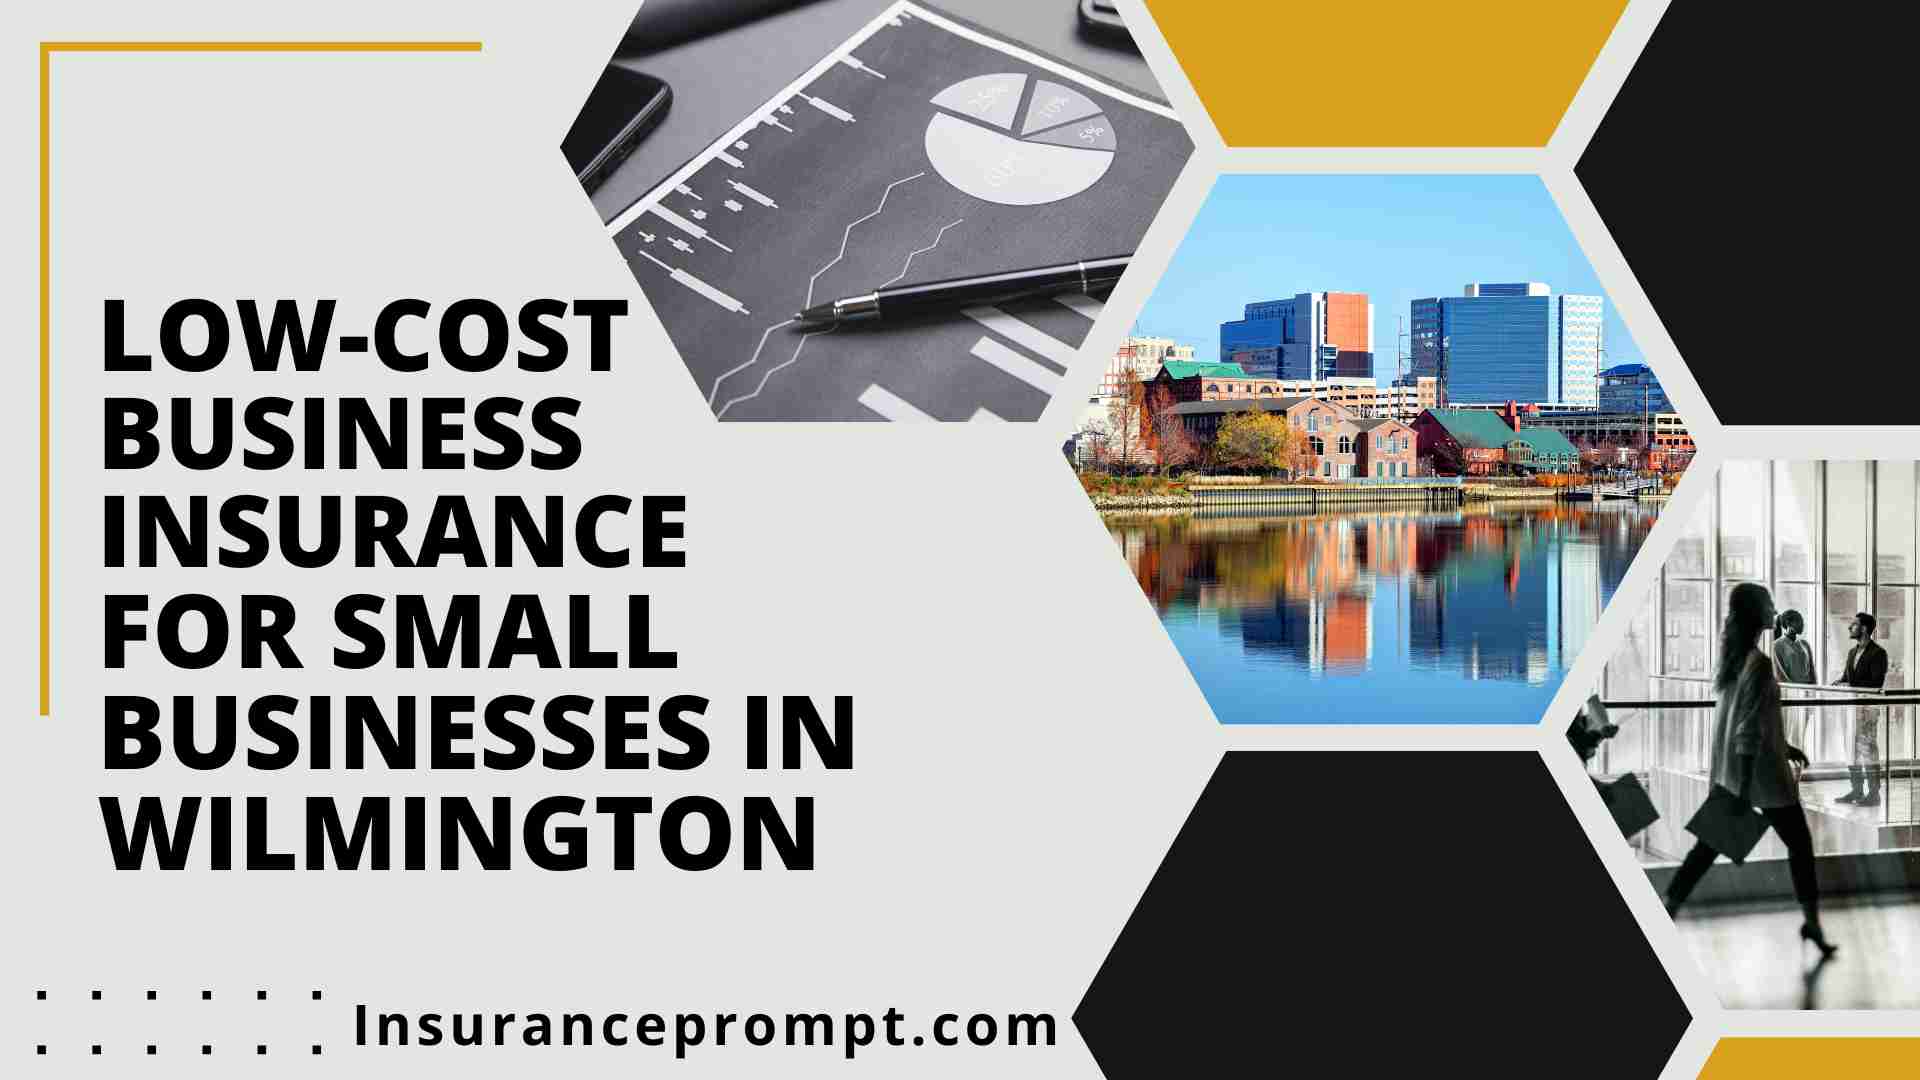 Low-cost business insurance for small businesses in Wilmington